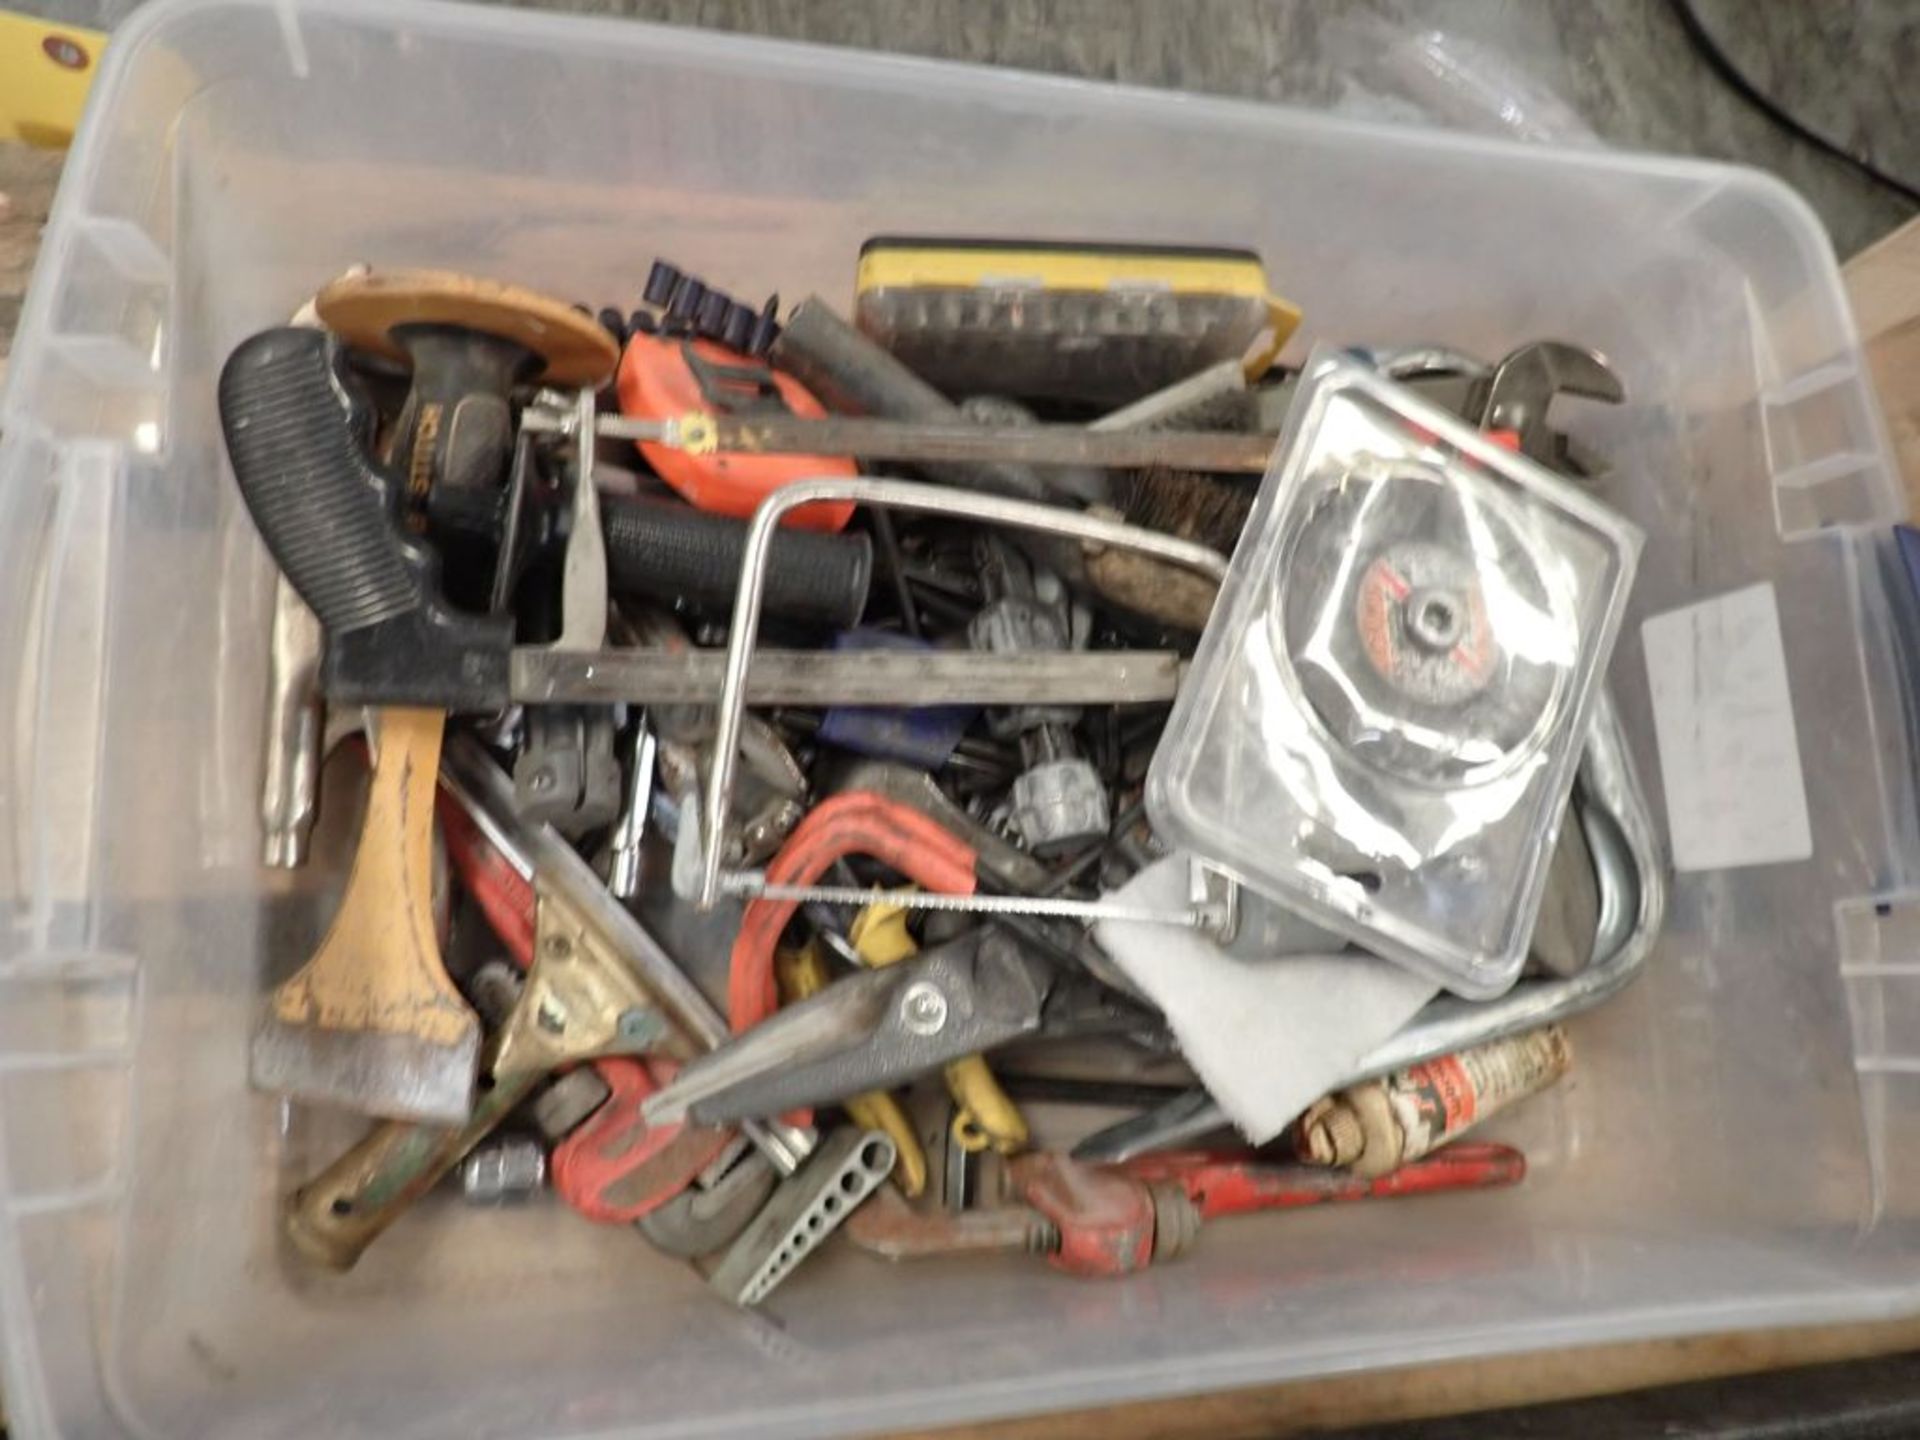 Lot of Assorted Components - Includes: Handsaw; Wrenches; Tile; Tag: 214979 - Image 7 of 11